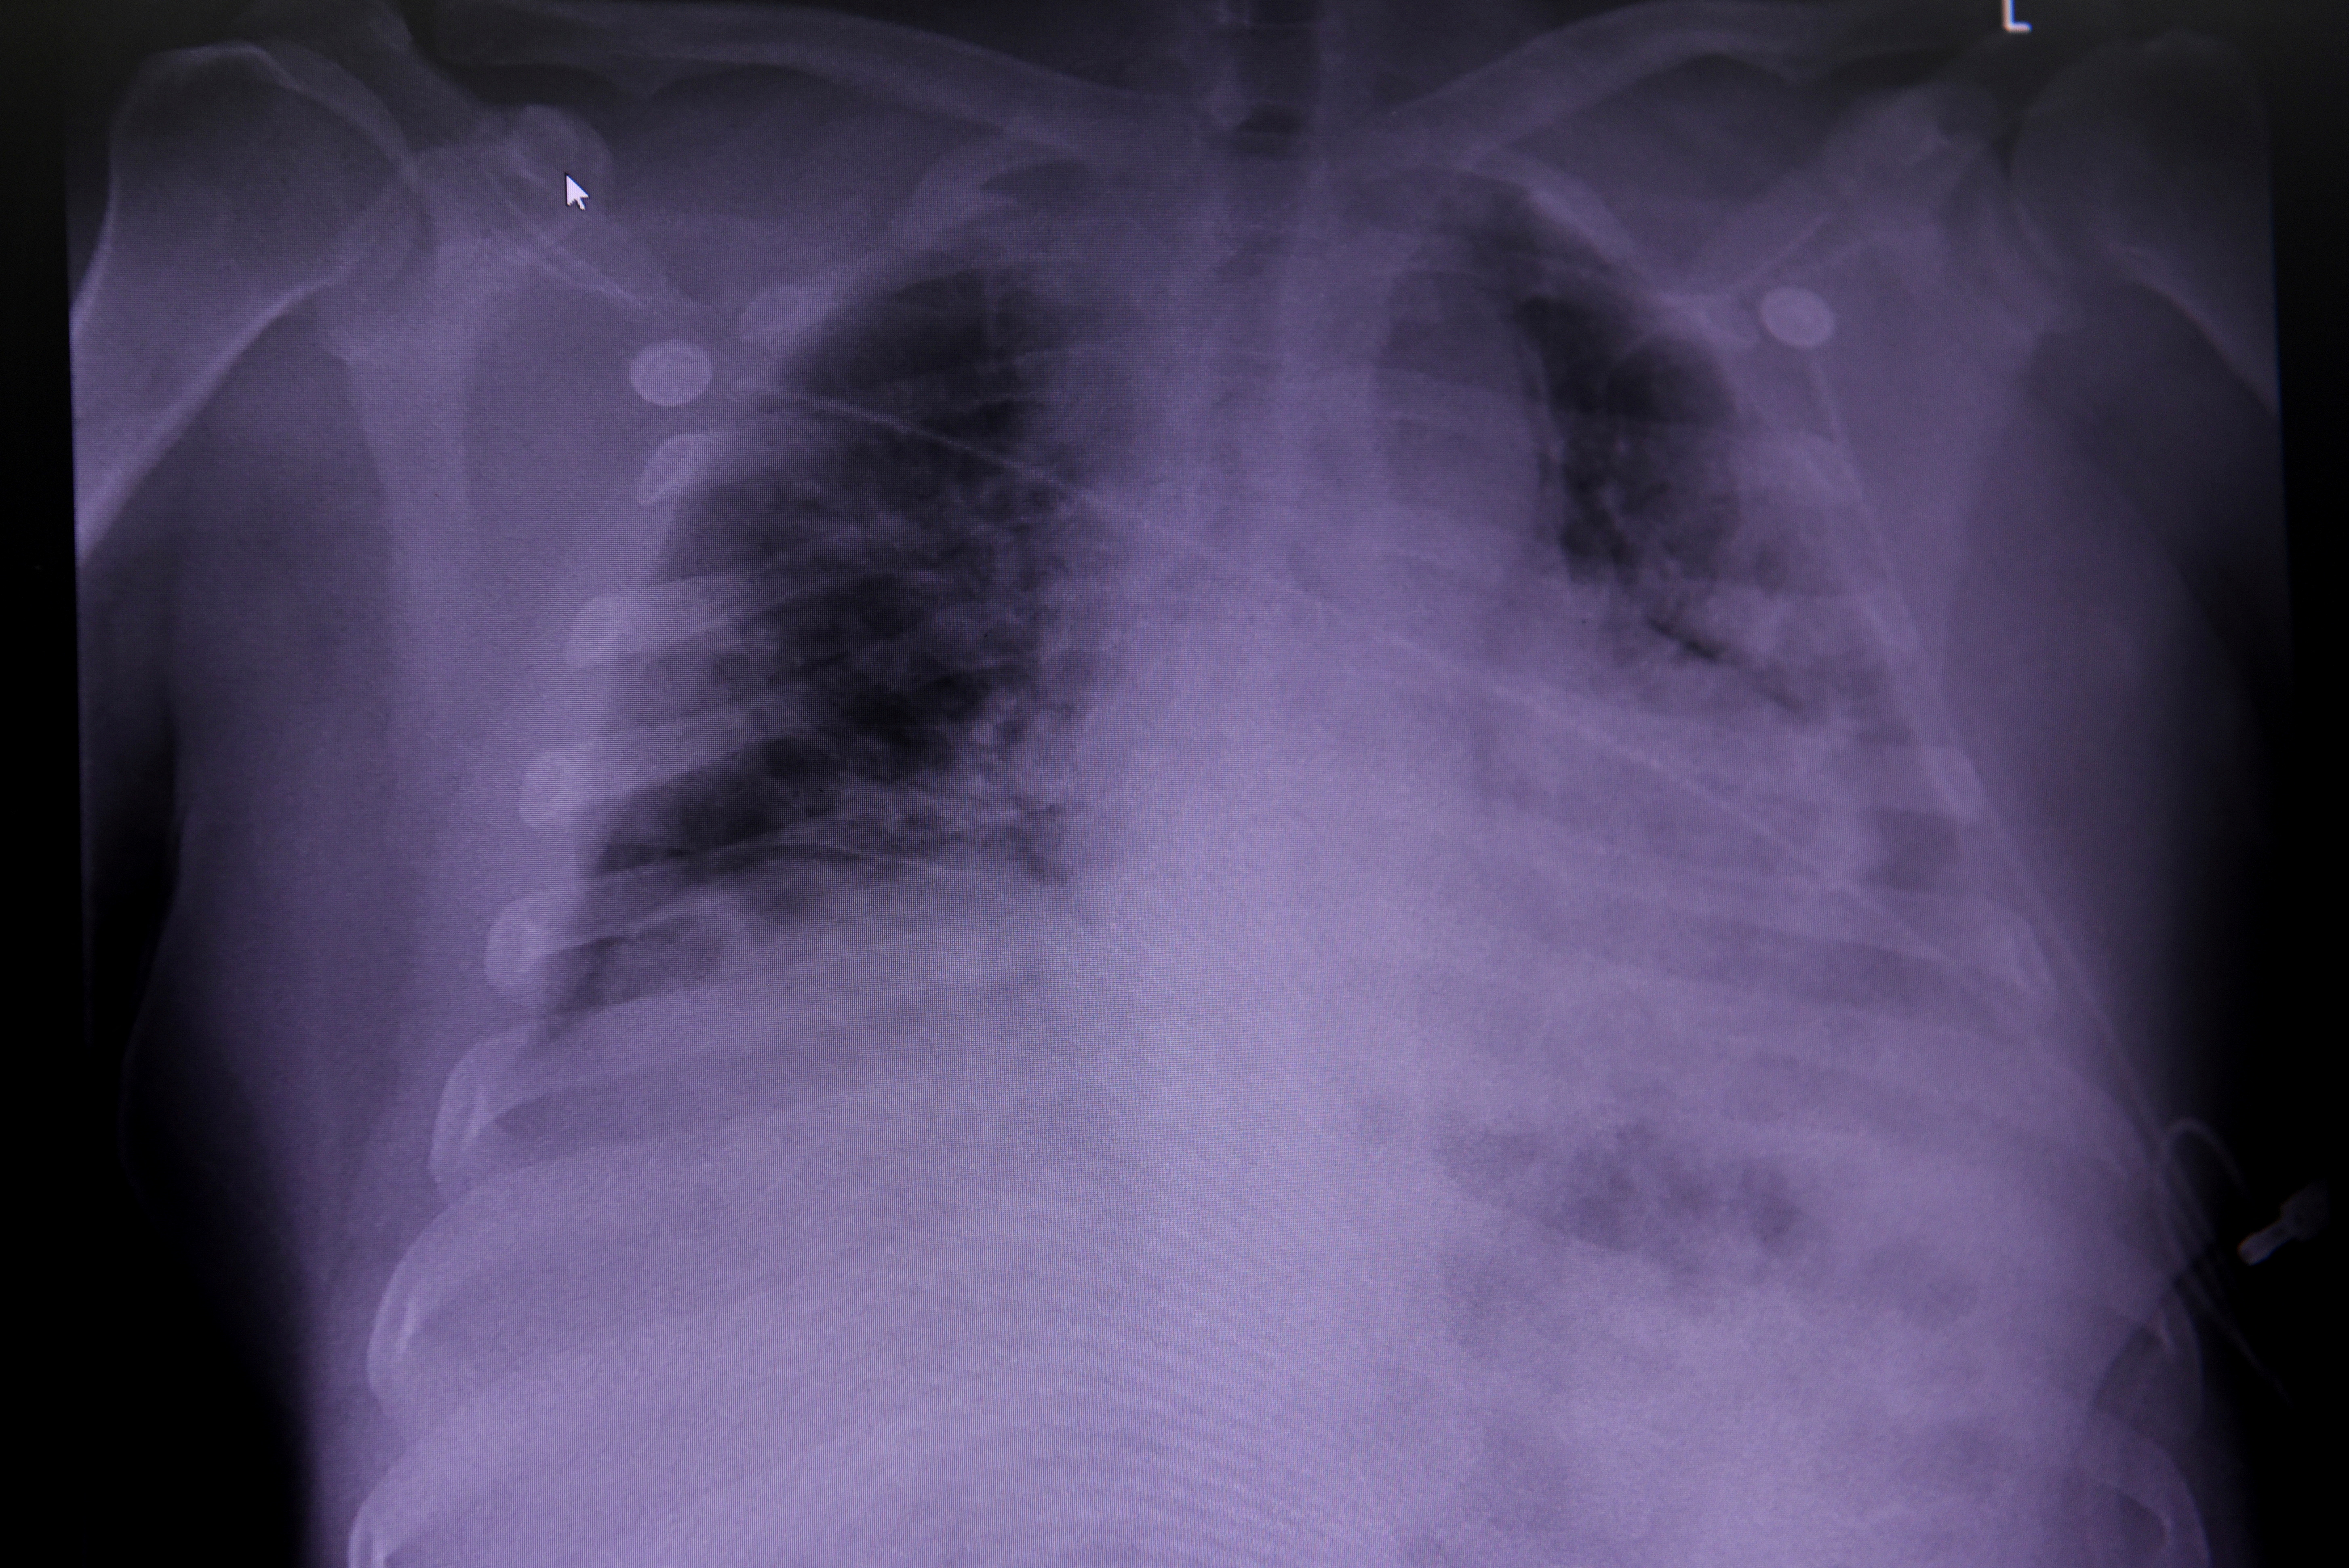 An X-ray of a COVID-19 patient's lungs in Houston, Texas